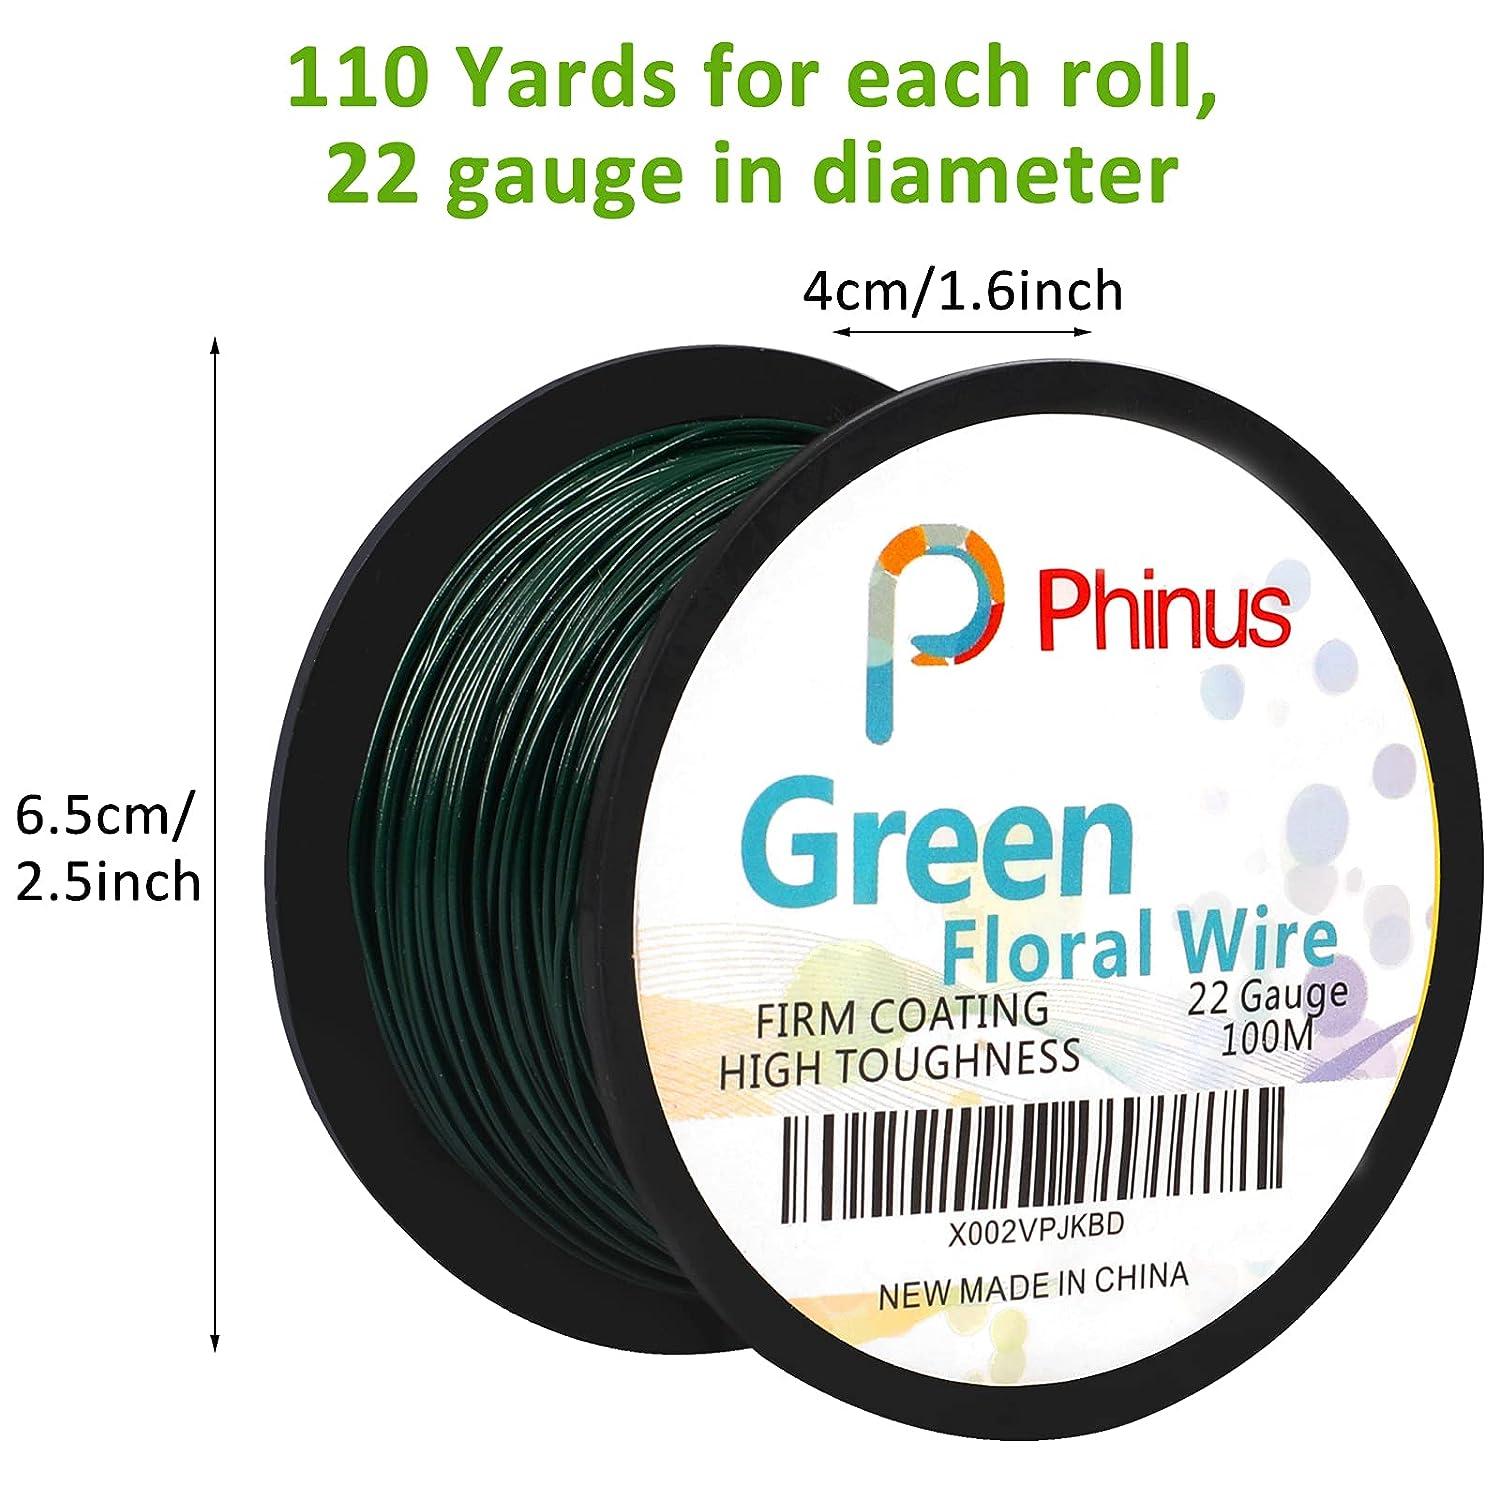 24 Gauge Floral Wire on Paddle: Green (4 Ounces)